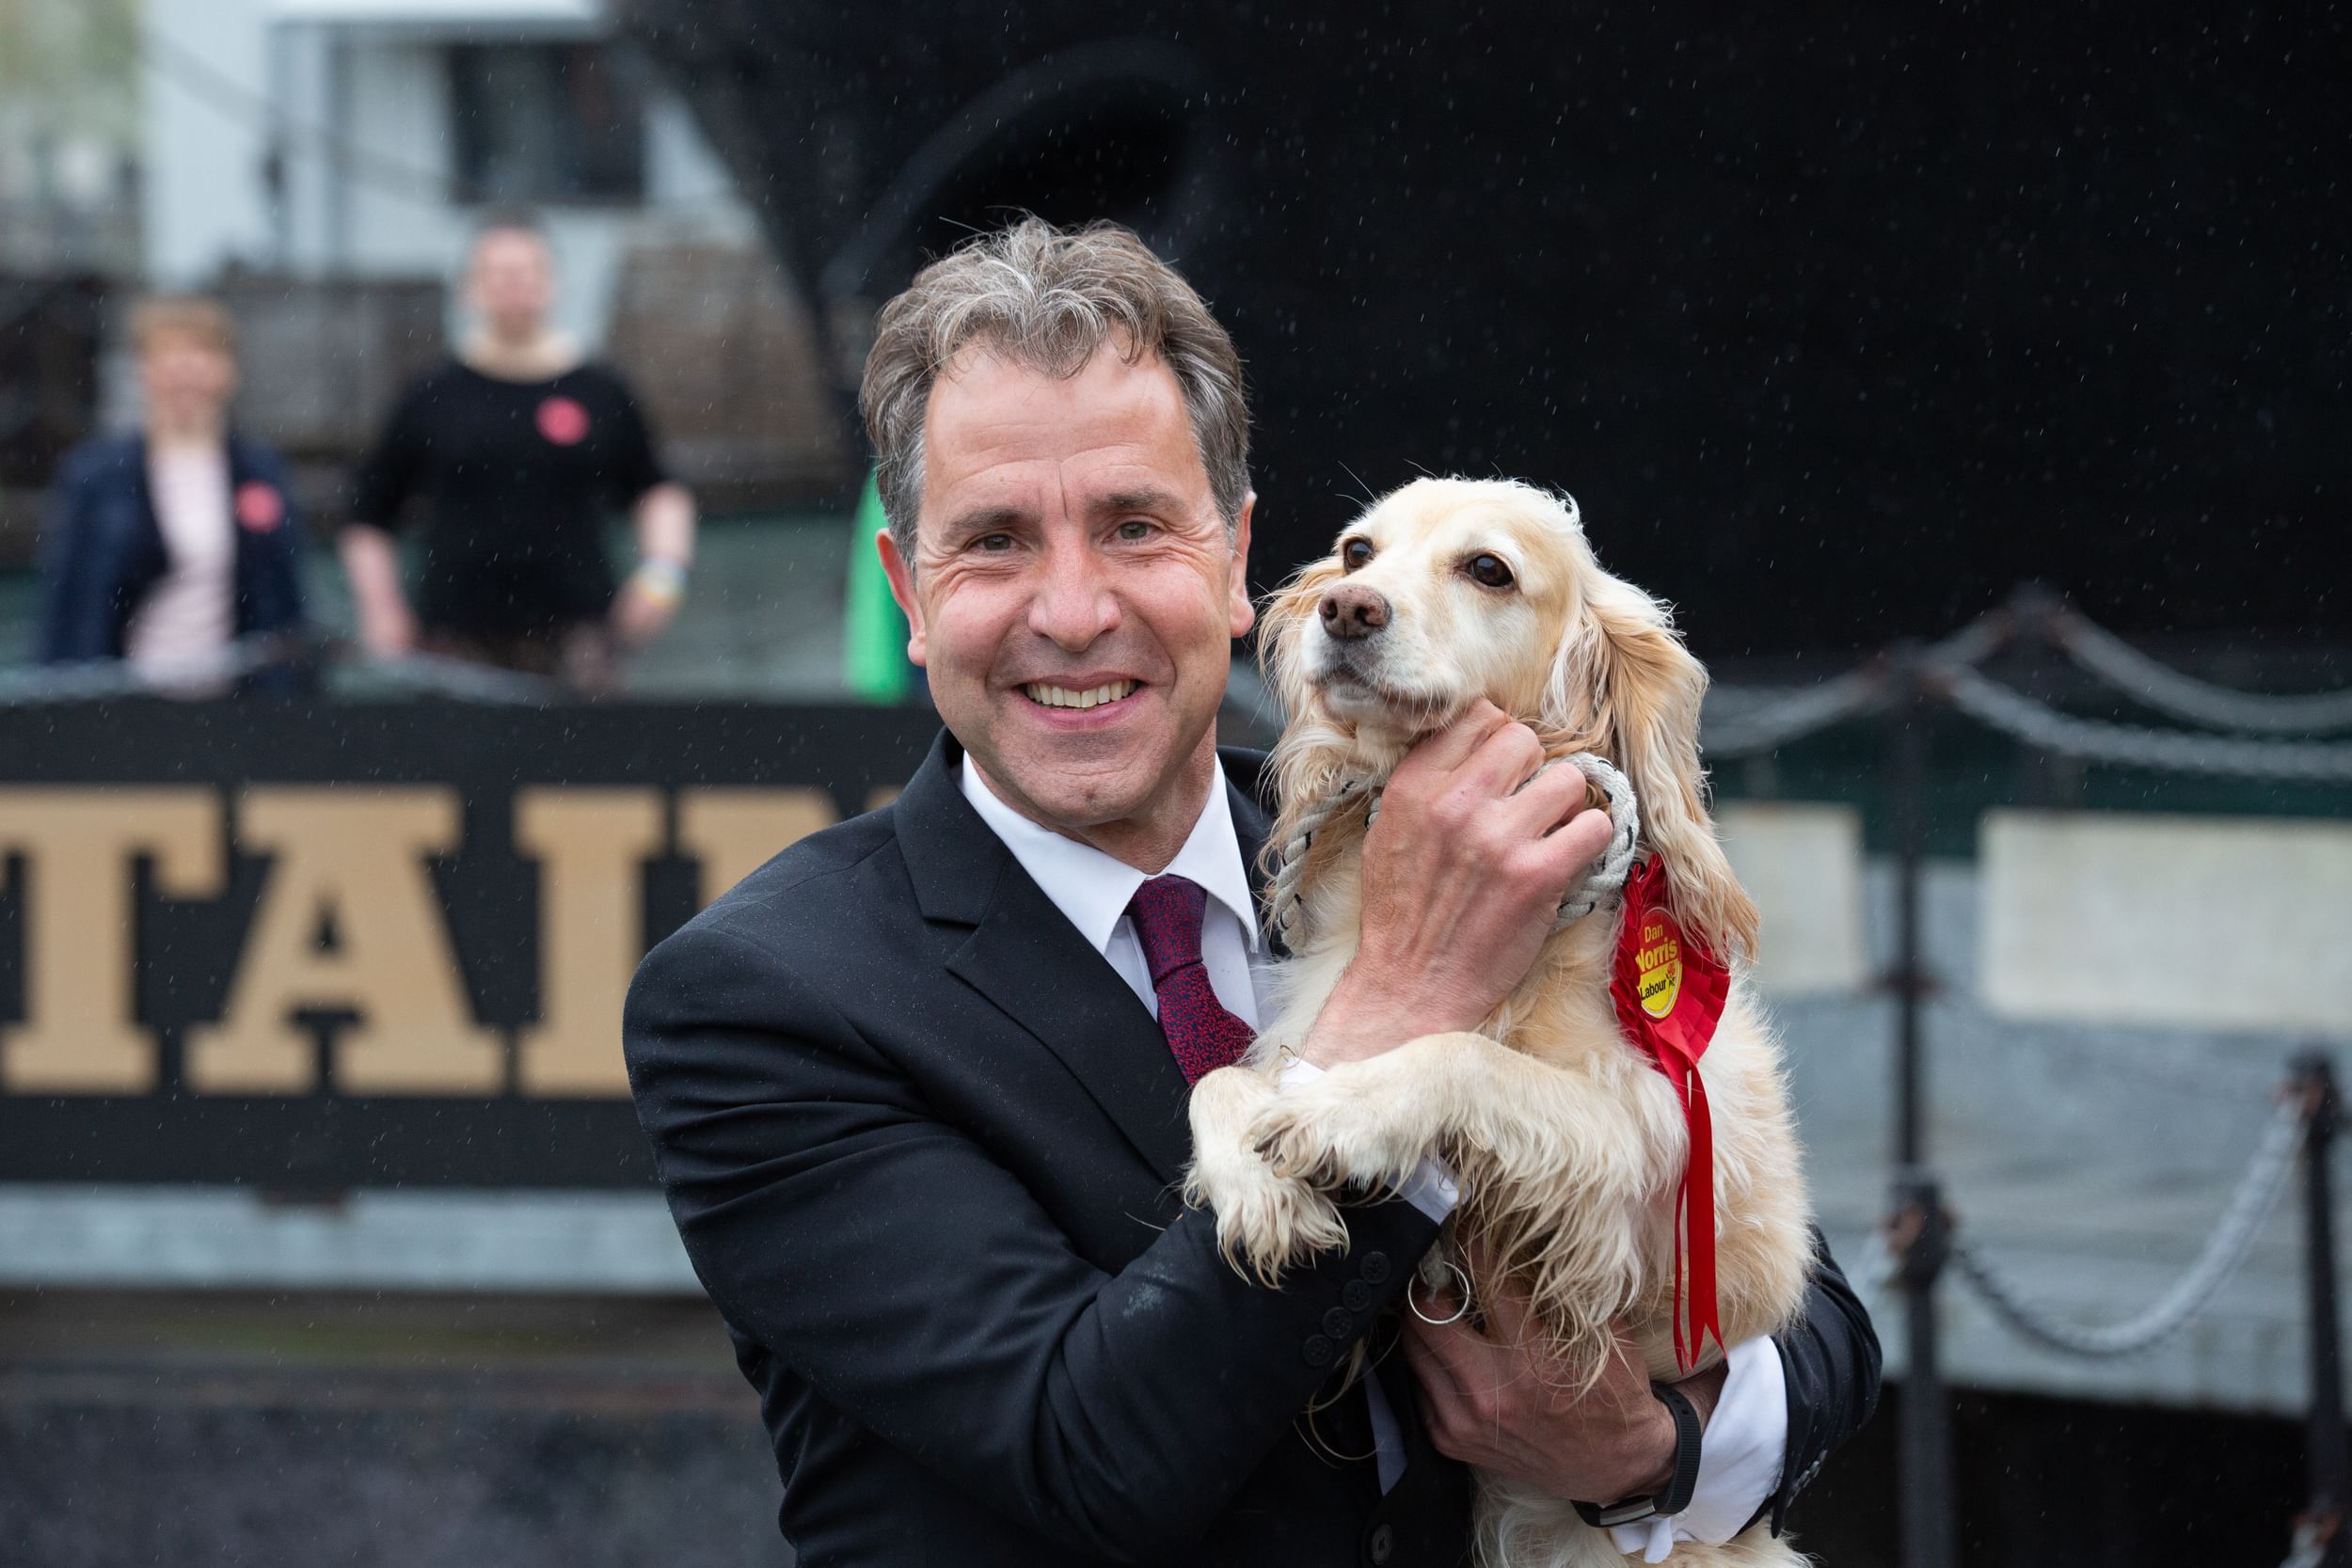 Dan Norris with his dog on election day